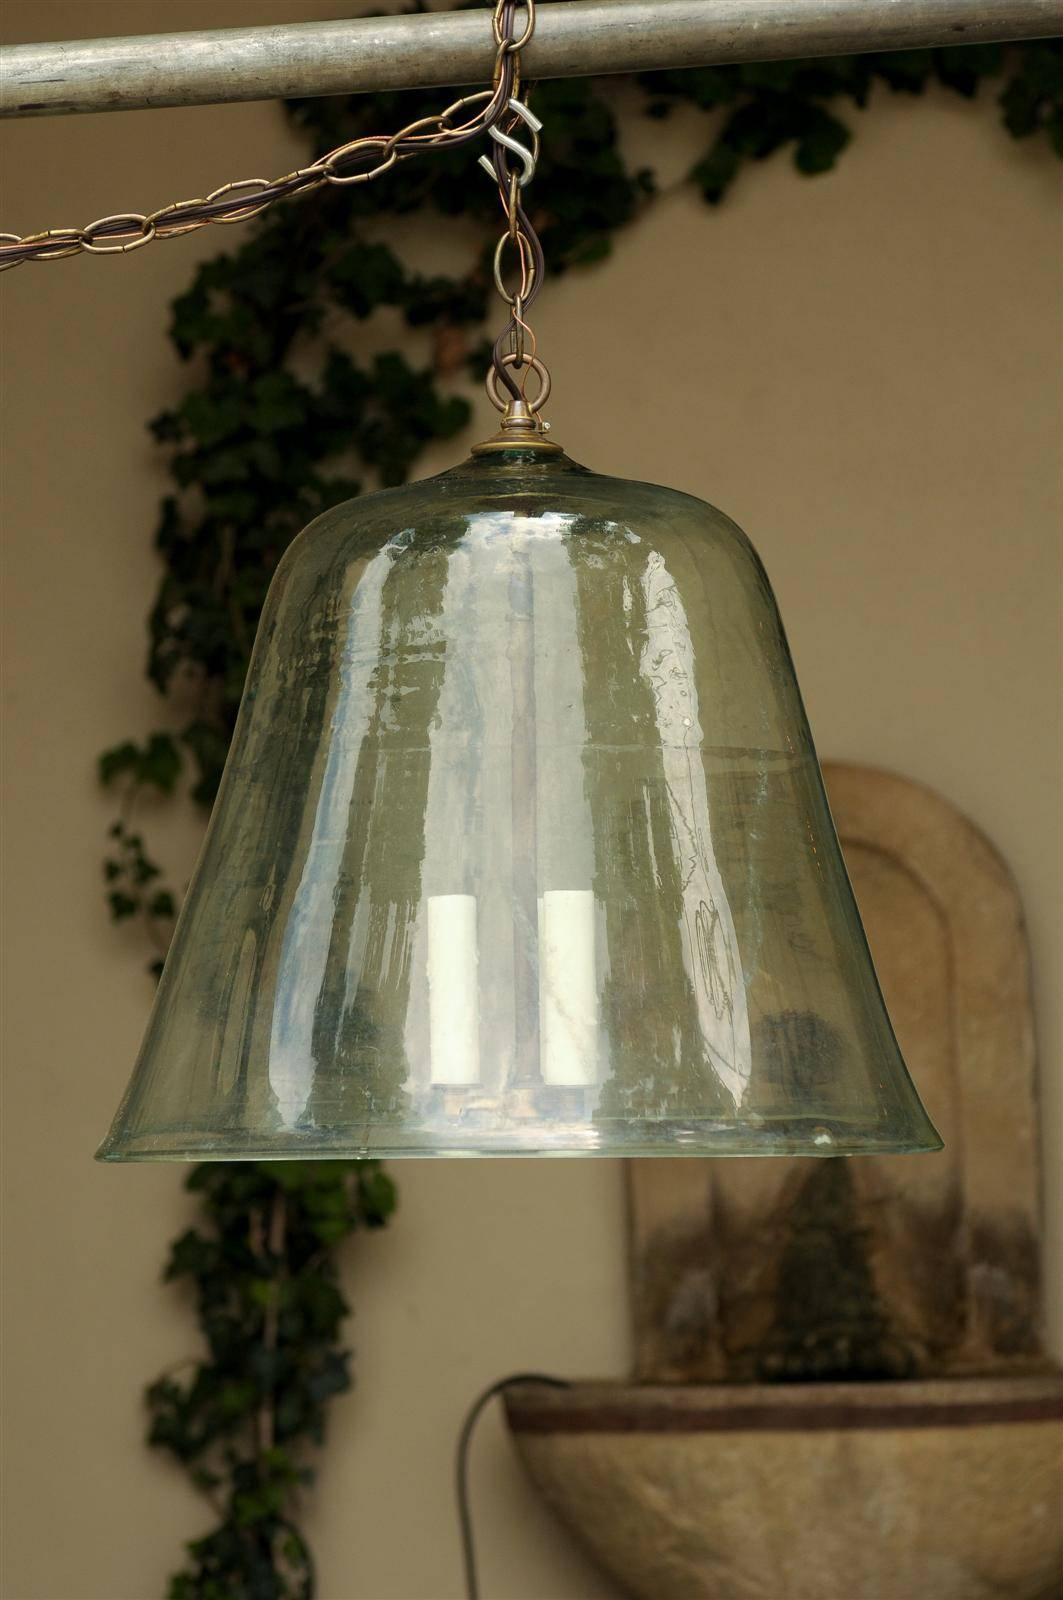 This French bell jar light fixture from the late 19th, early 20th century was made from an old French glass cloche (bell in French). The hand-blown cloche has been newly wired for the US with three sockets supporting authentic wax sleeves. The